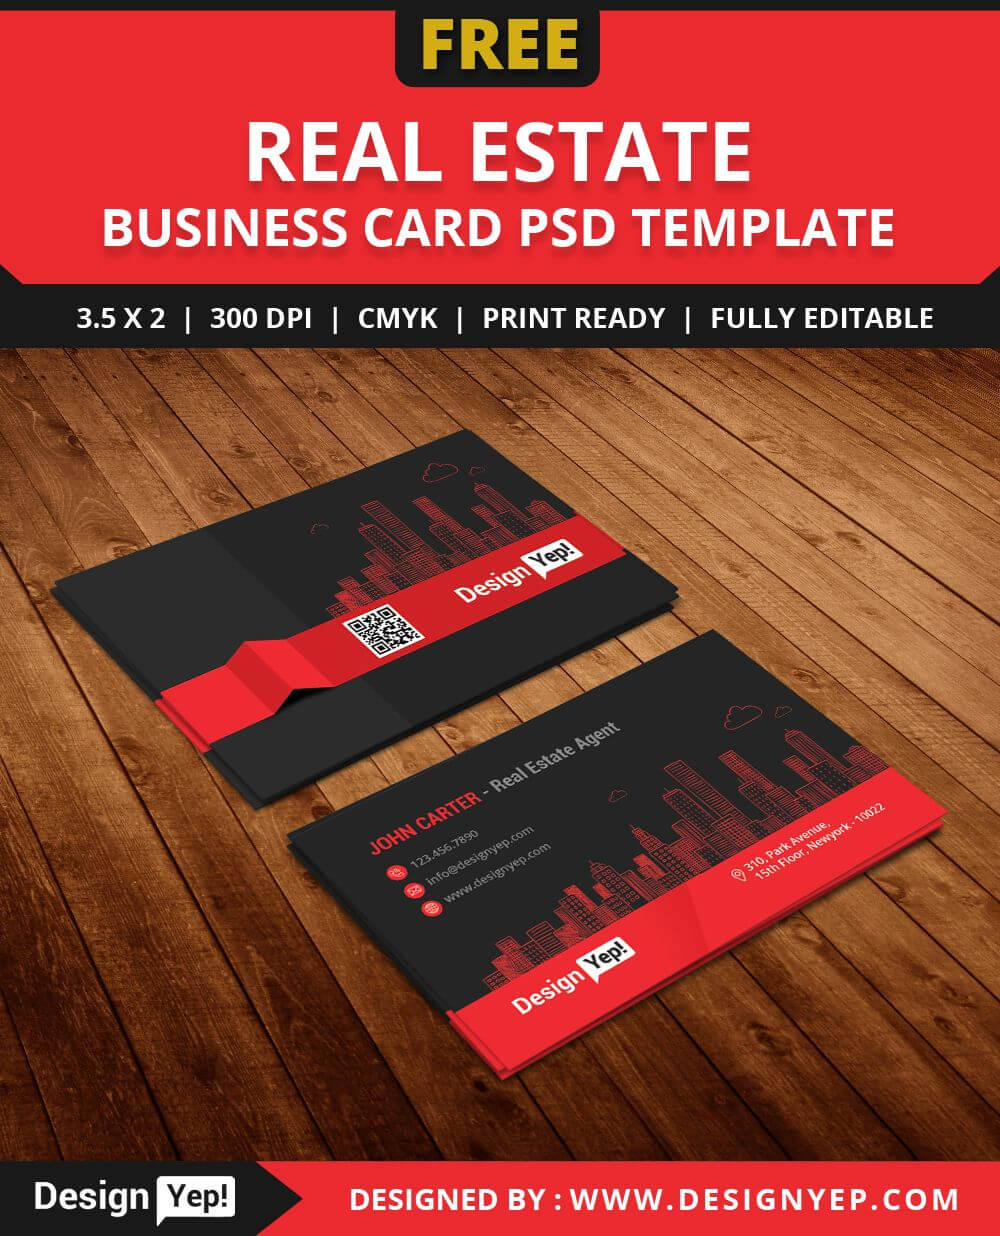 Free Real Estate Agent Business Card Template Psd | Free Regarding Real Estate Business Cards Templates Free